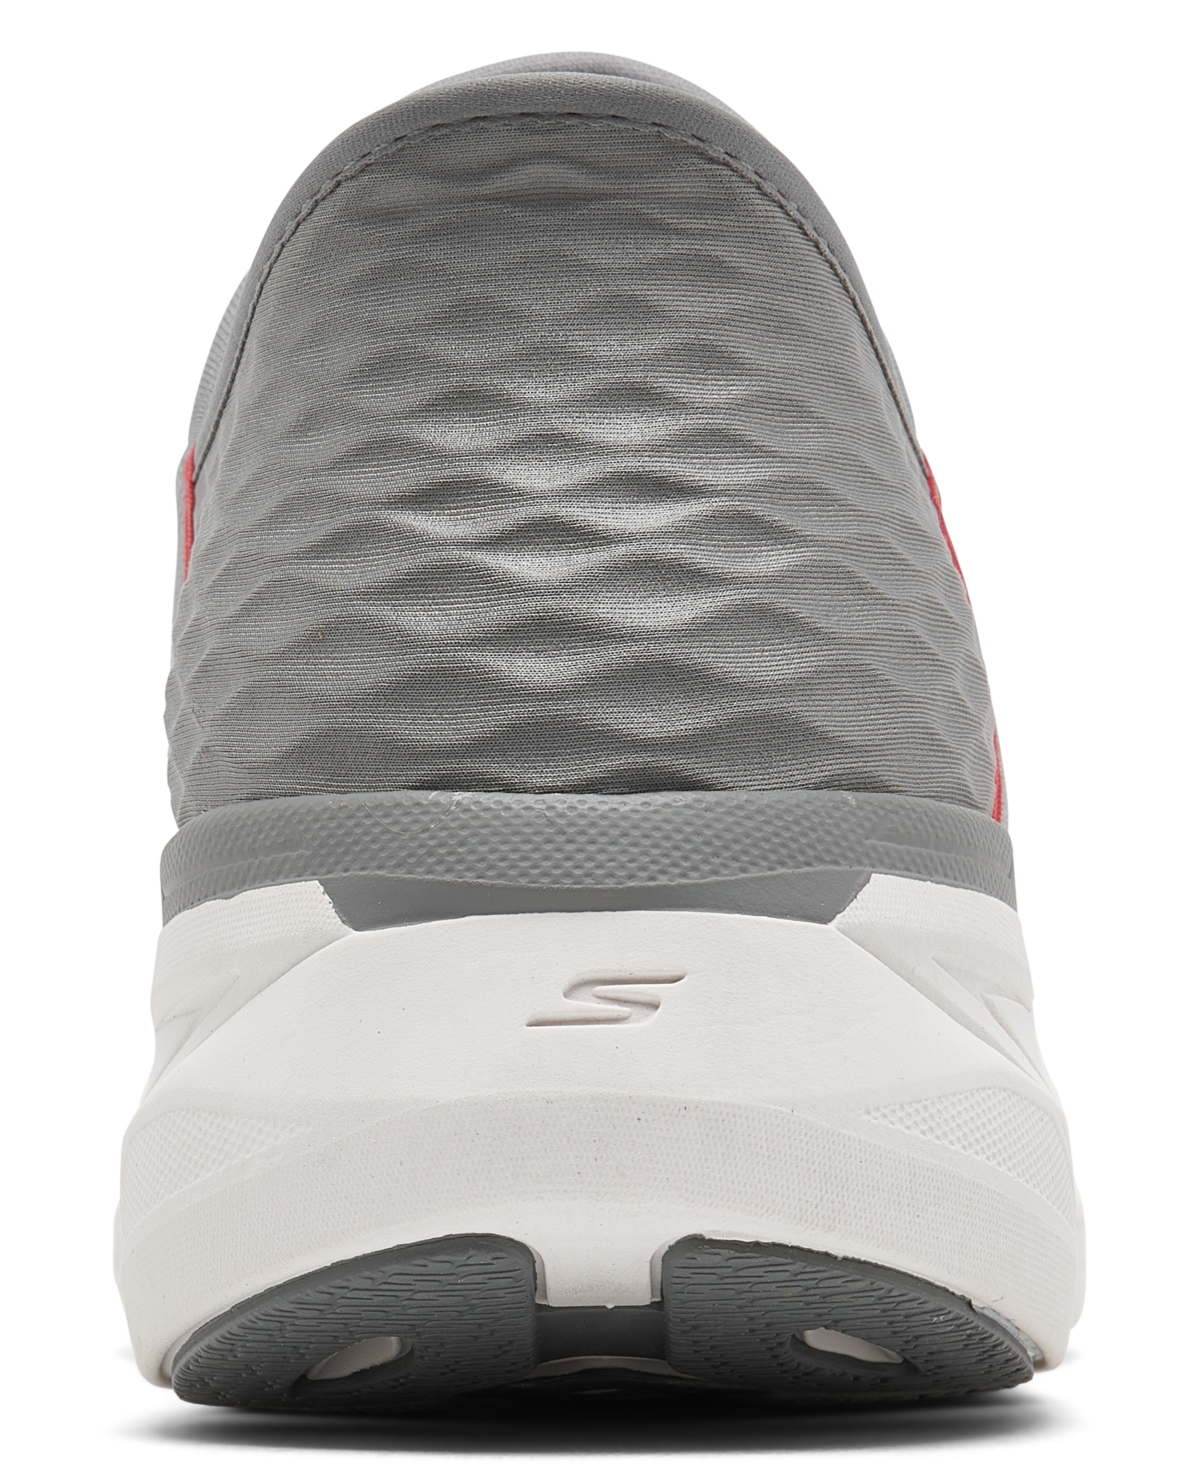 Shop Skechers Men's Max Cushioning Premier Running And Walking Sneakers From Finish Line In Grey,red